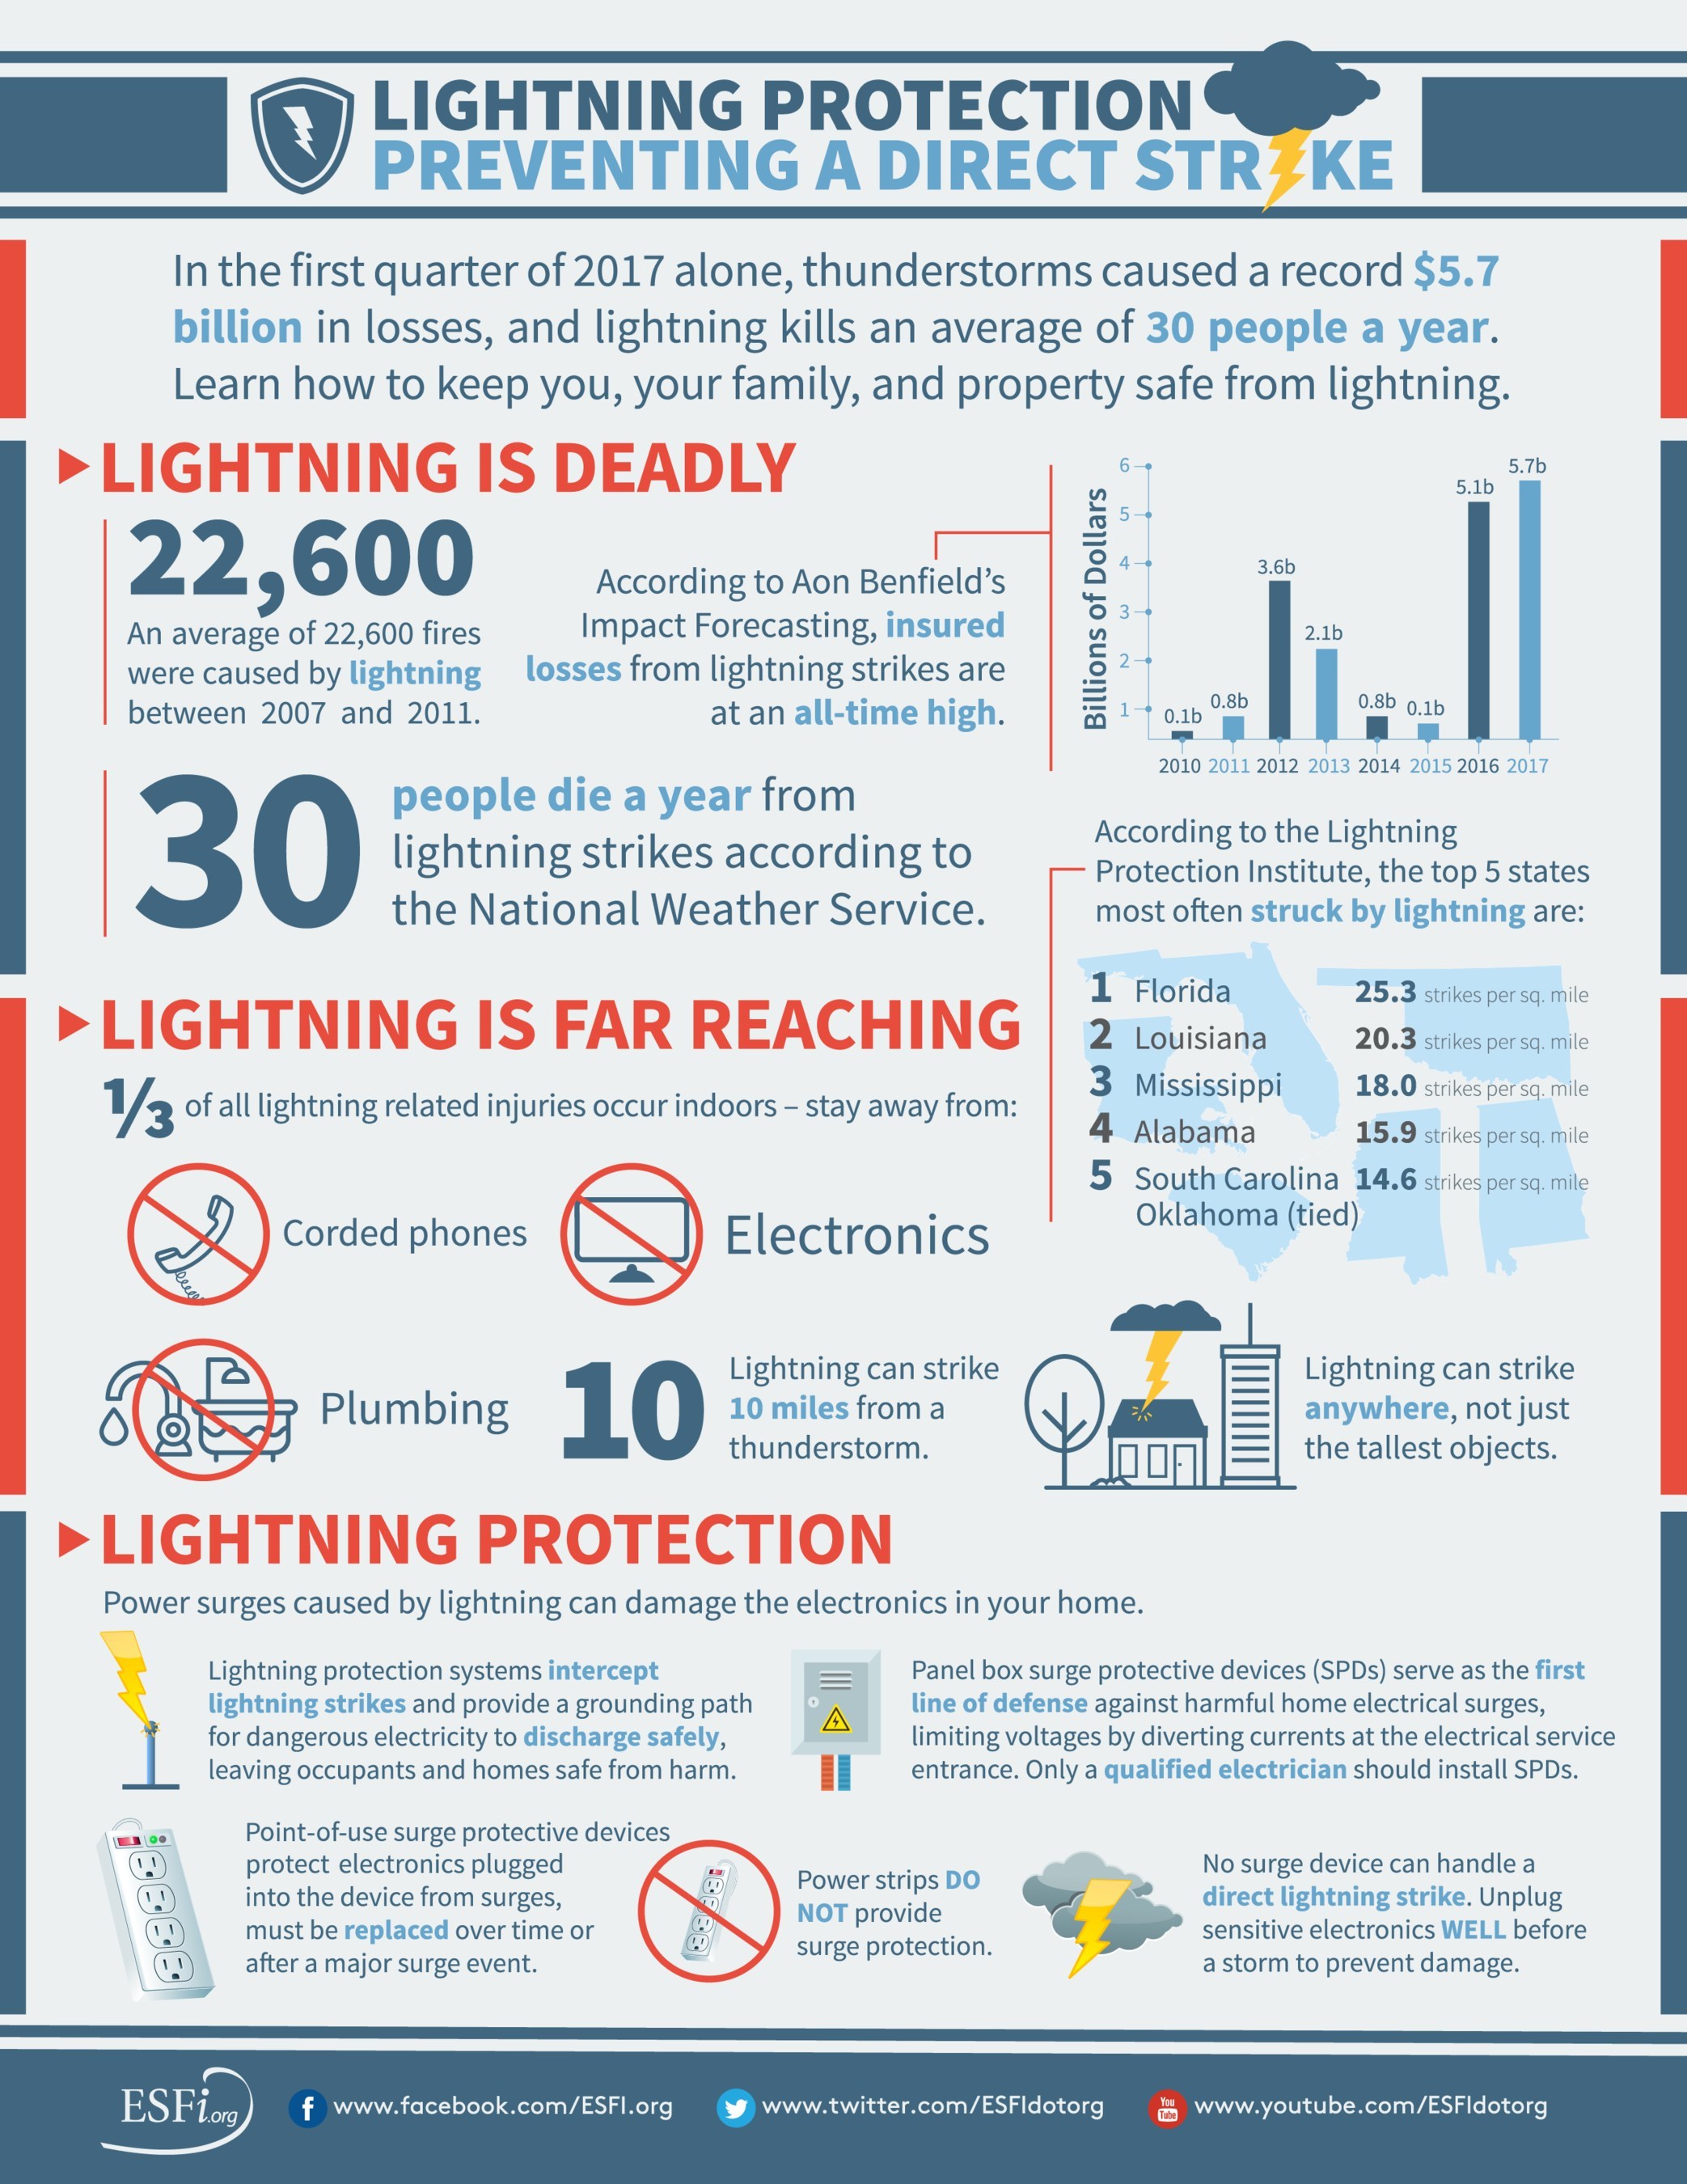 Although lightning is the weather hazard that affects most people, most of the time, property owners can avoid costly lightning losses by investing in a professionally-installed lightning protection system. Code-compliant systems employ a rooftop and grounding network of UL-listed components and surge protection devices to safely dissipate lightning’s harmful electricity.